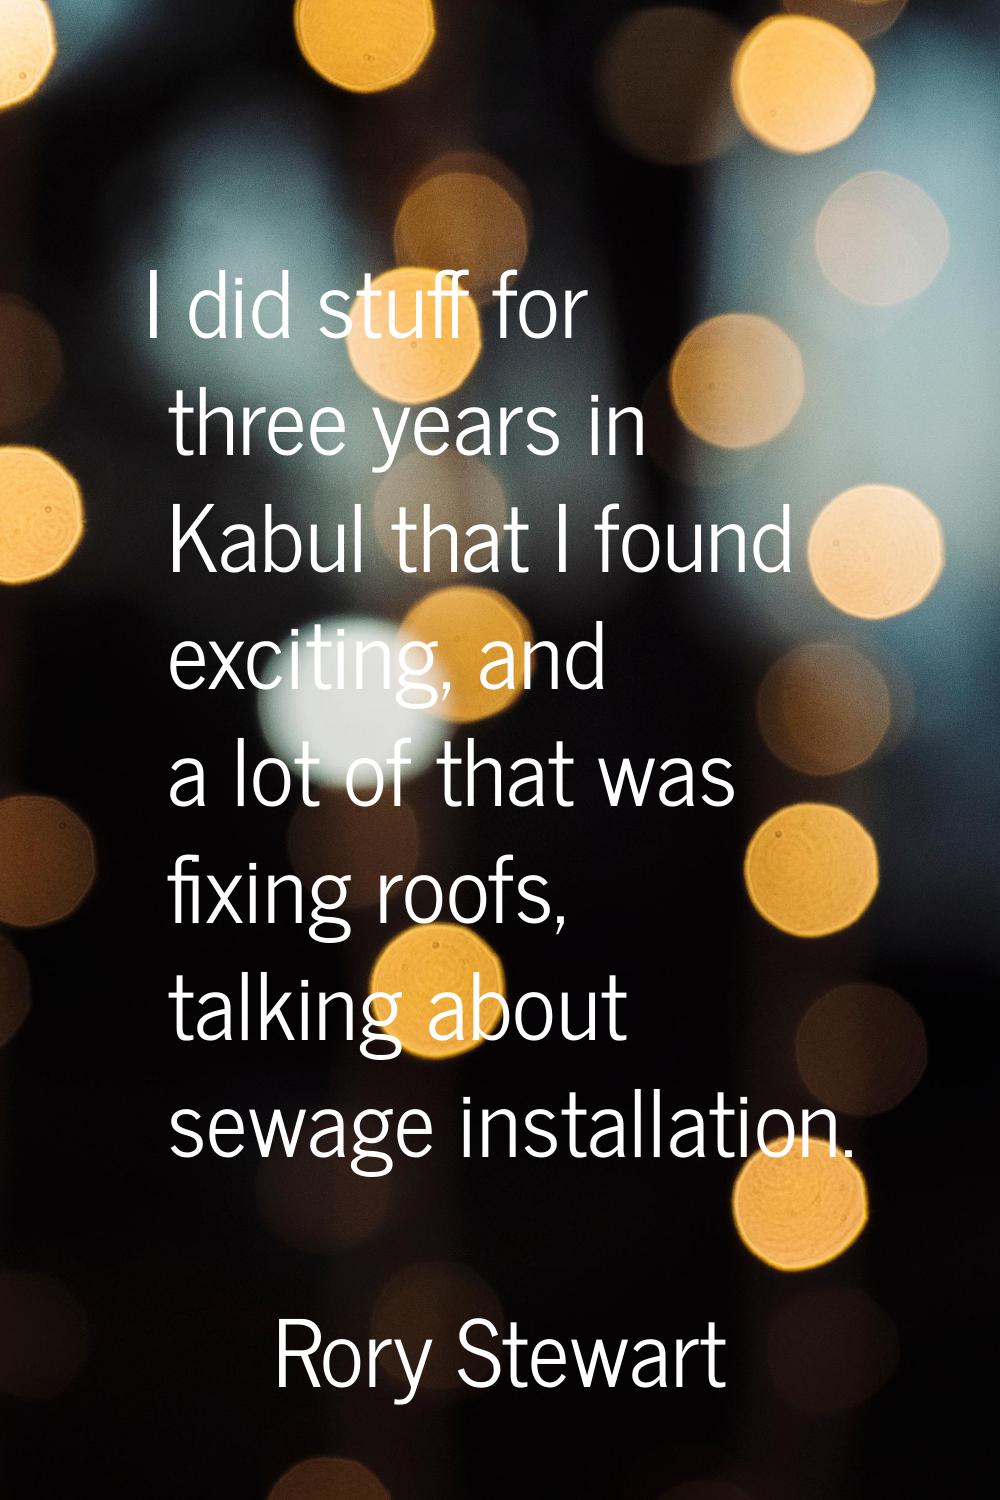 I did stuff for three years in Kabul that I found exciting, and a lot of that was fixing roofs, tal